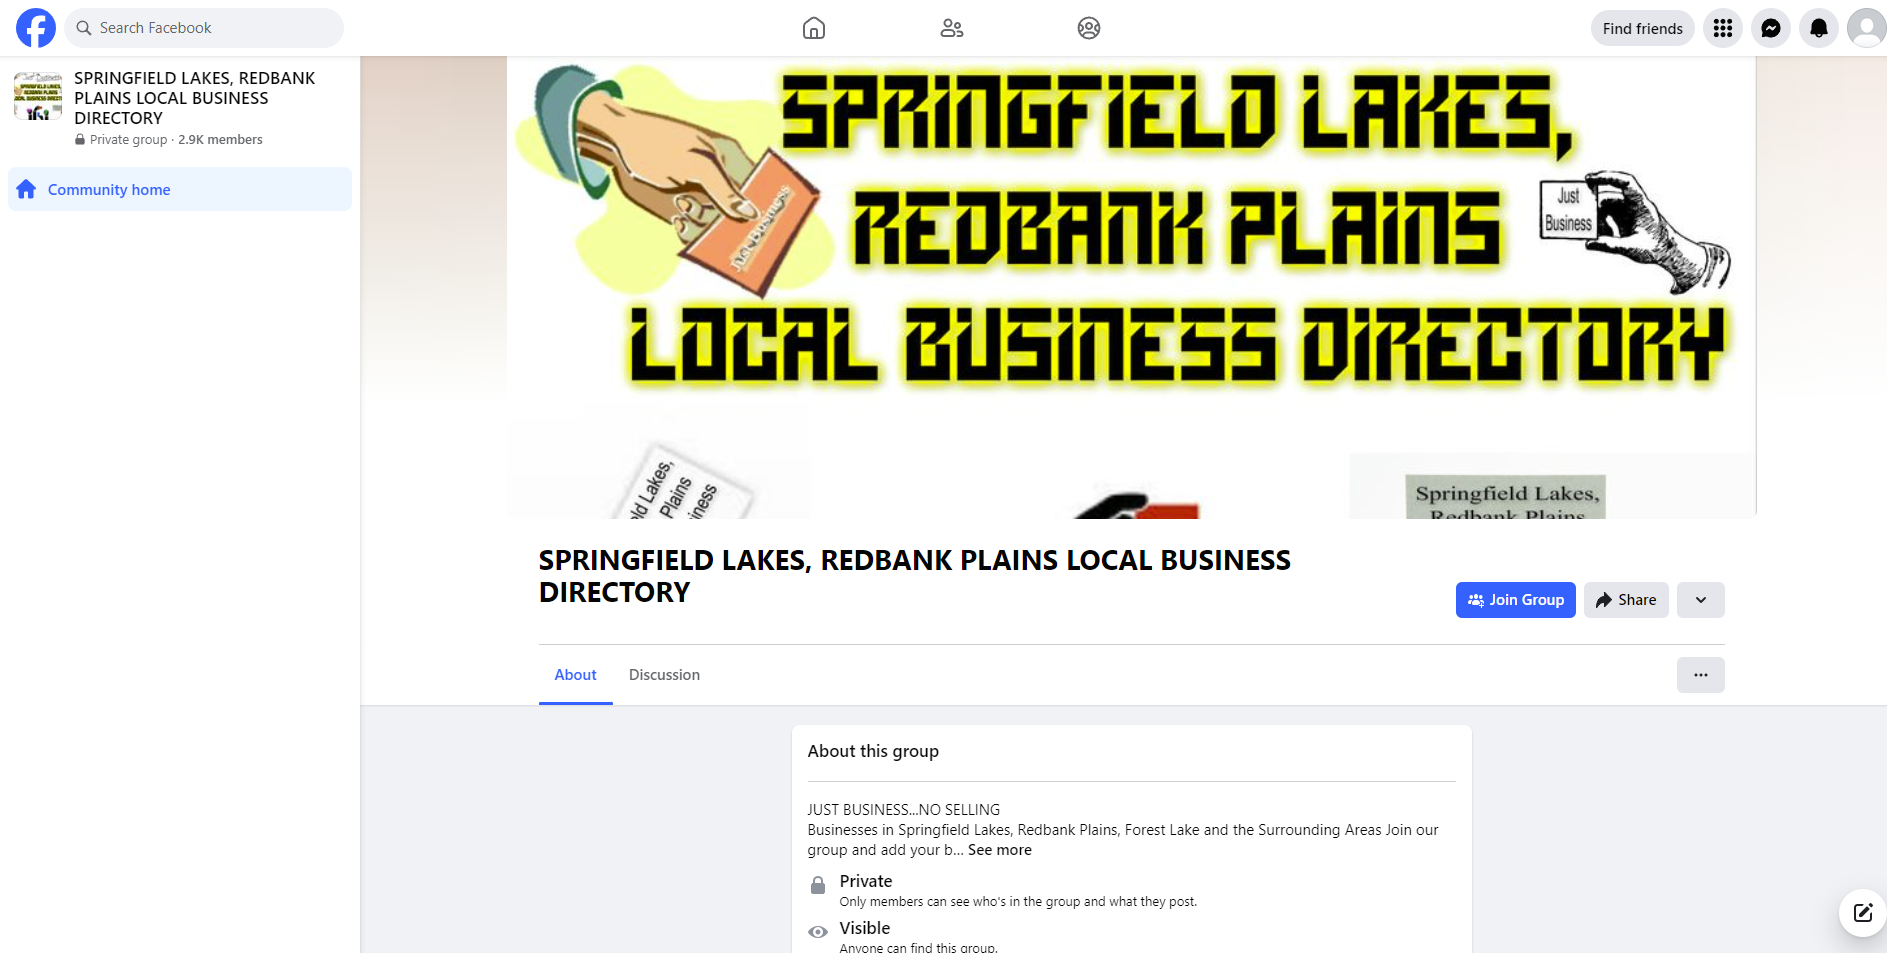 SPRINGFIELD LAKES, REDBANK PLAINS LOCAL BUSINESS DIRECTORY